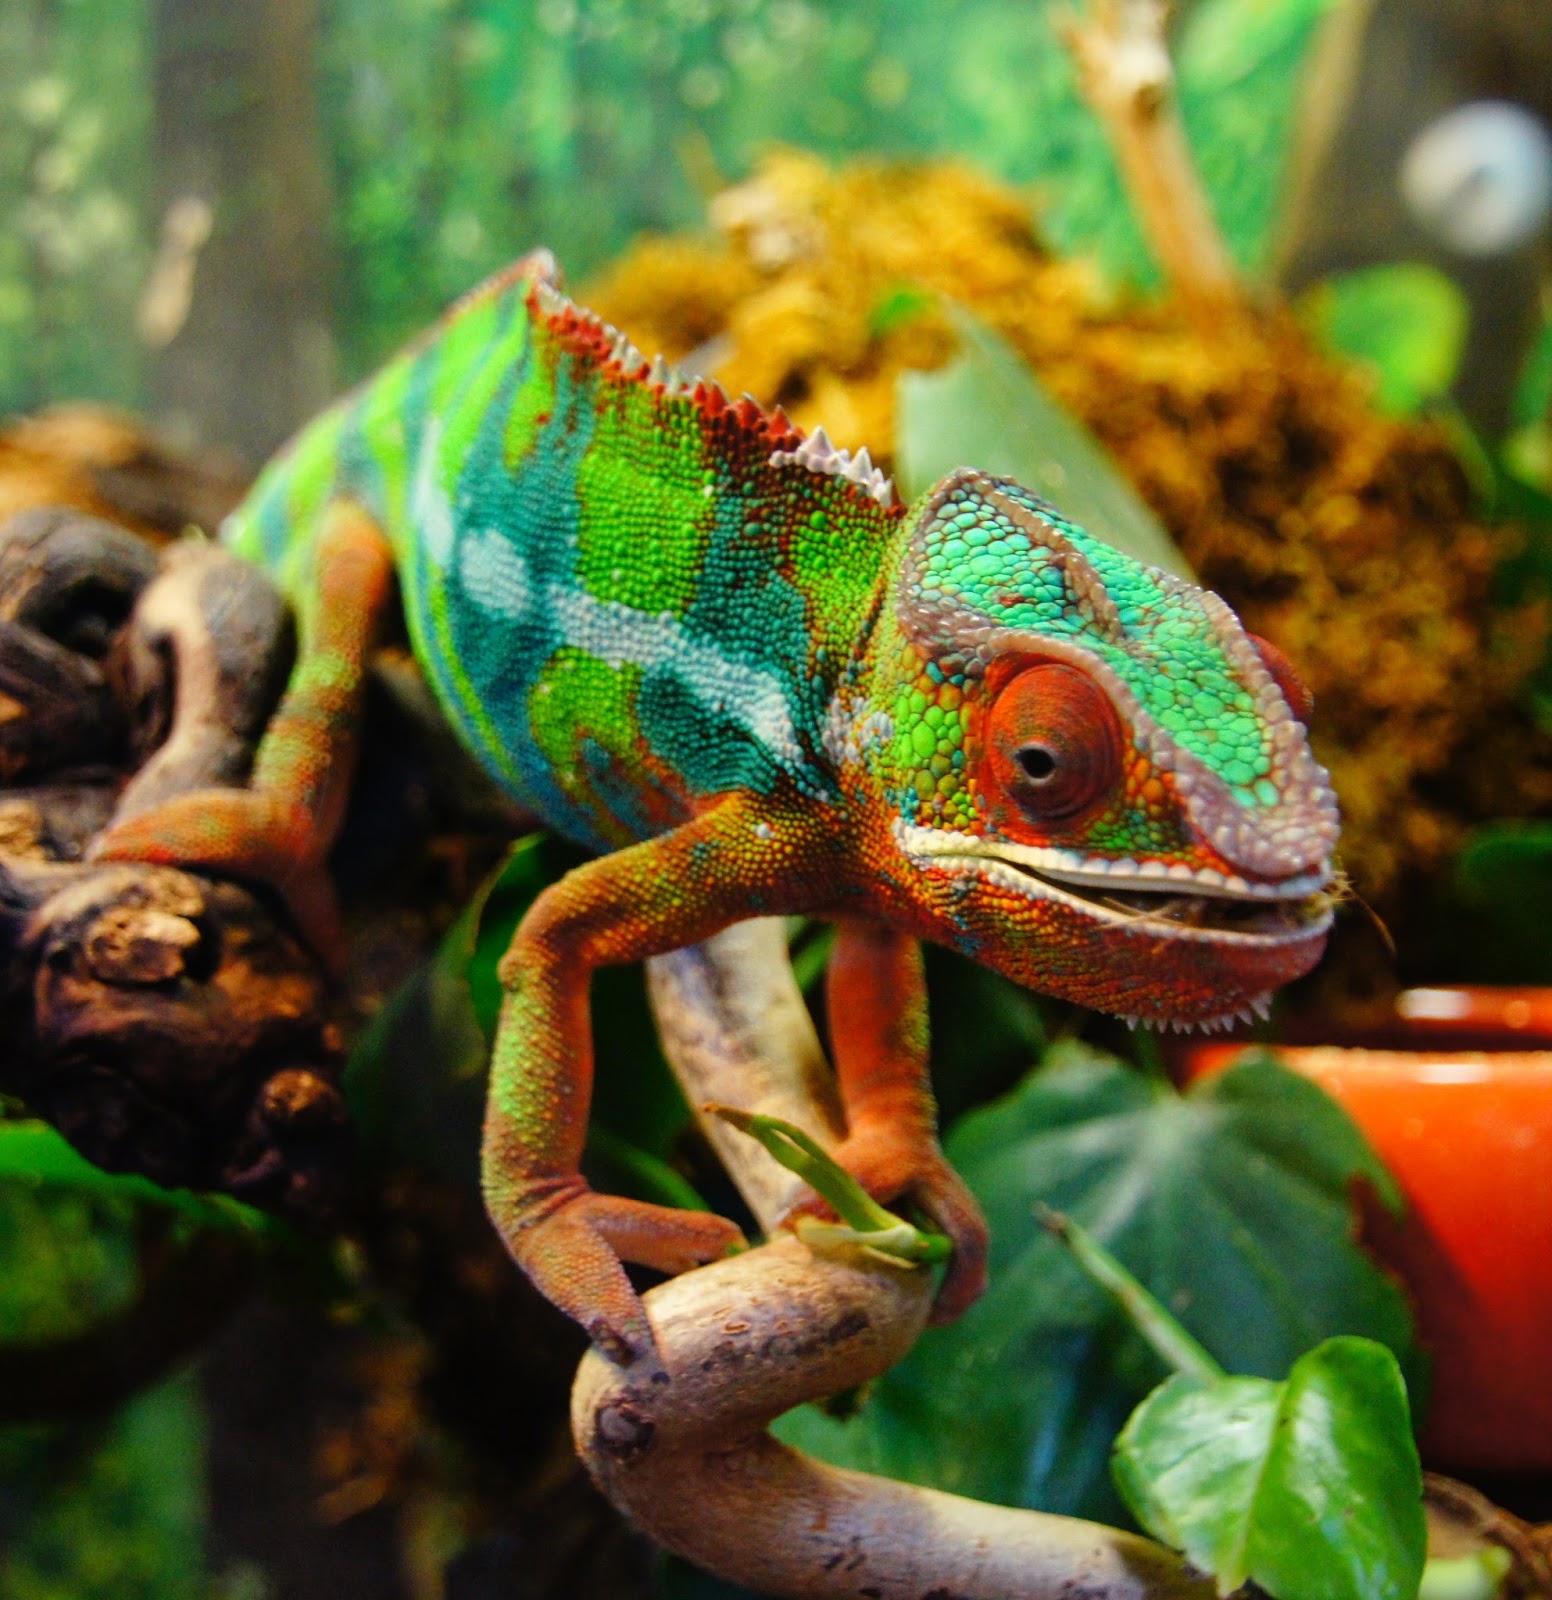 An amazing photo of a panther chameleon.